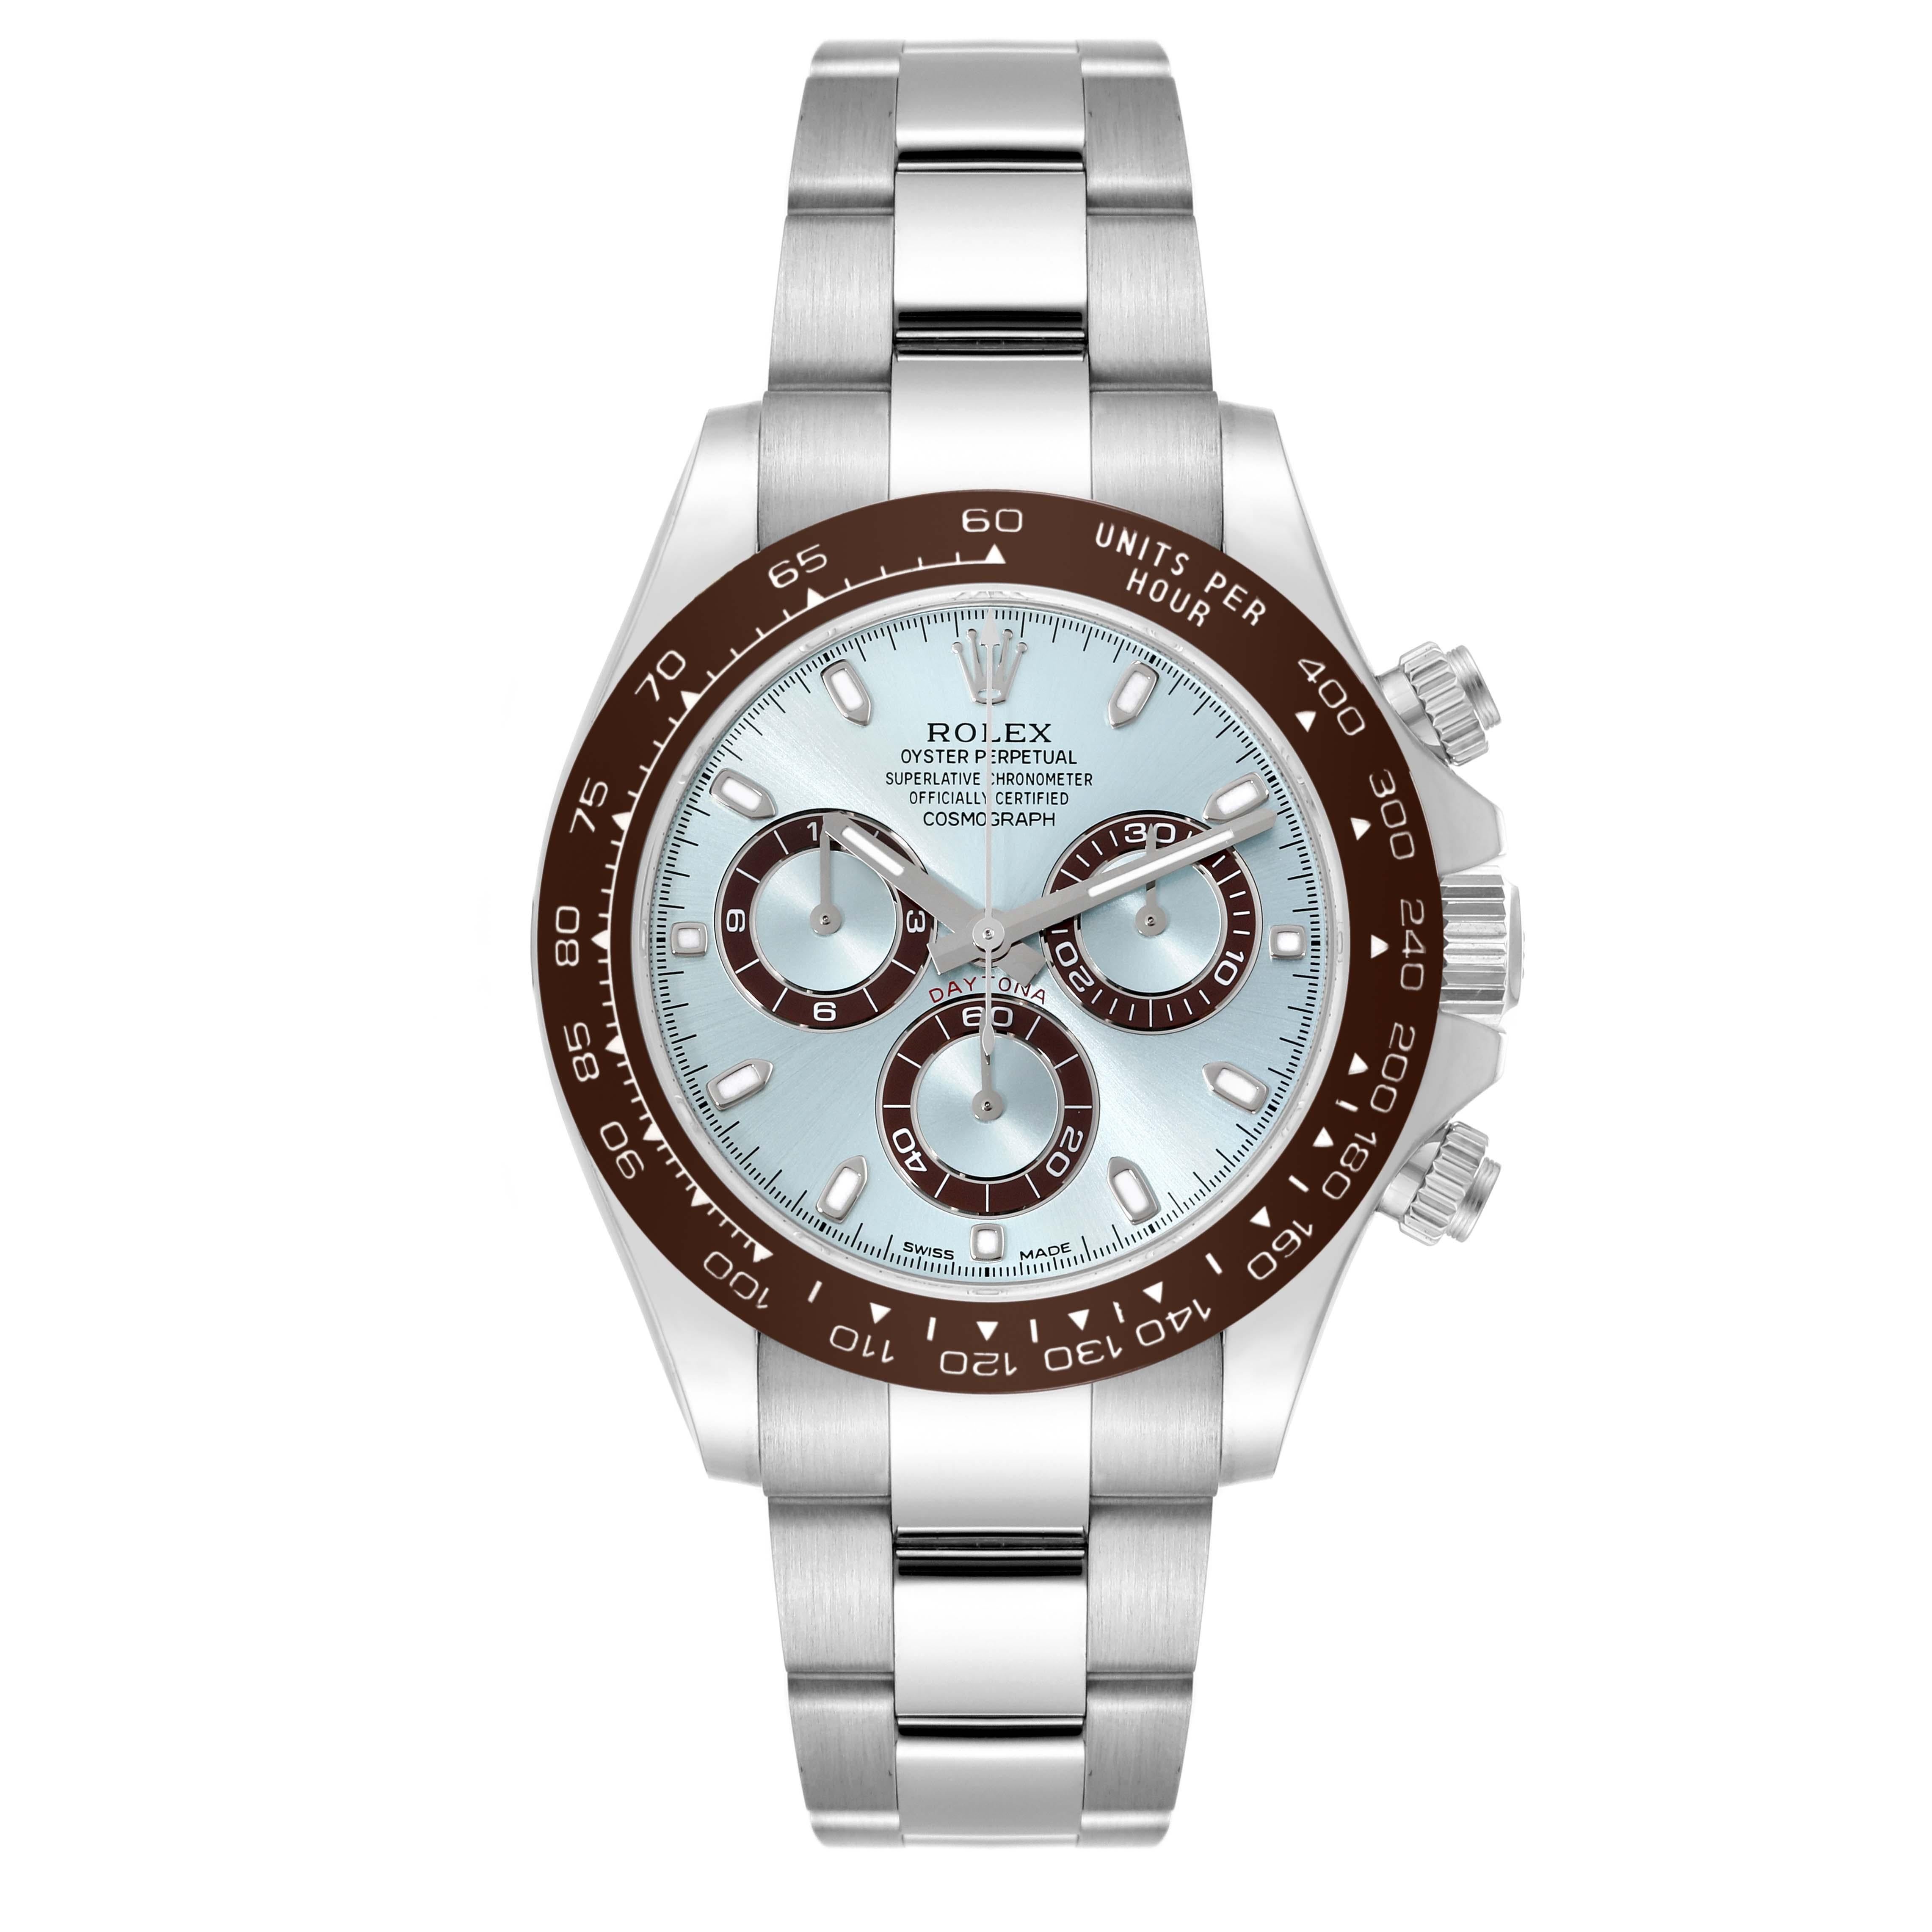 Rolex Daytona Ice Blue Dial Platinum Chronograph Mens Watch 116506 Box Card. Officially certified chronometer automatic self-winding movement. Rhodium-plated, 44 jewels, straight line lever escapement, monometallic balance adjusted to temperatures